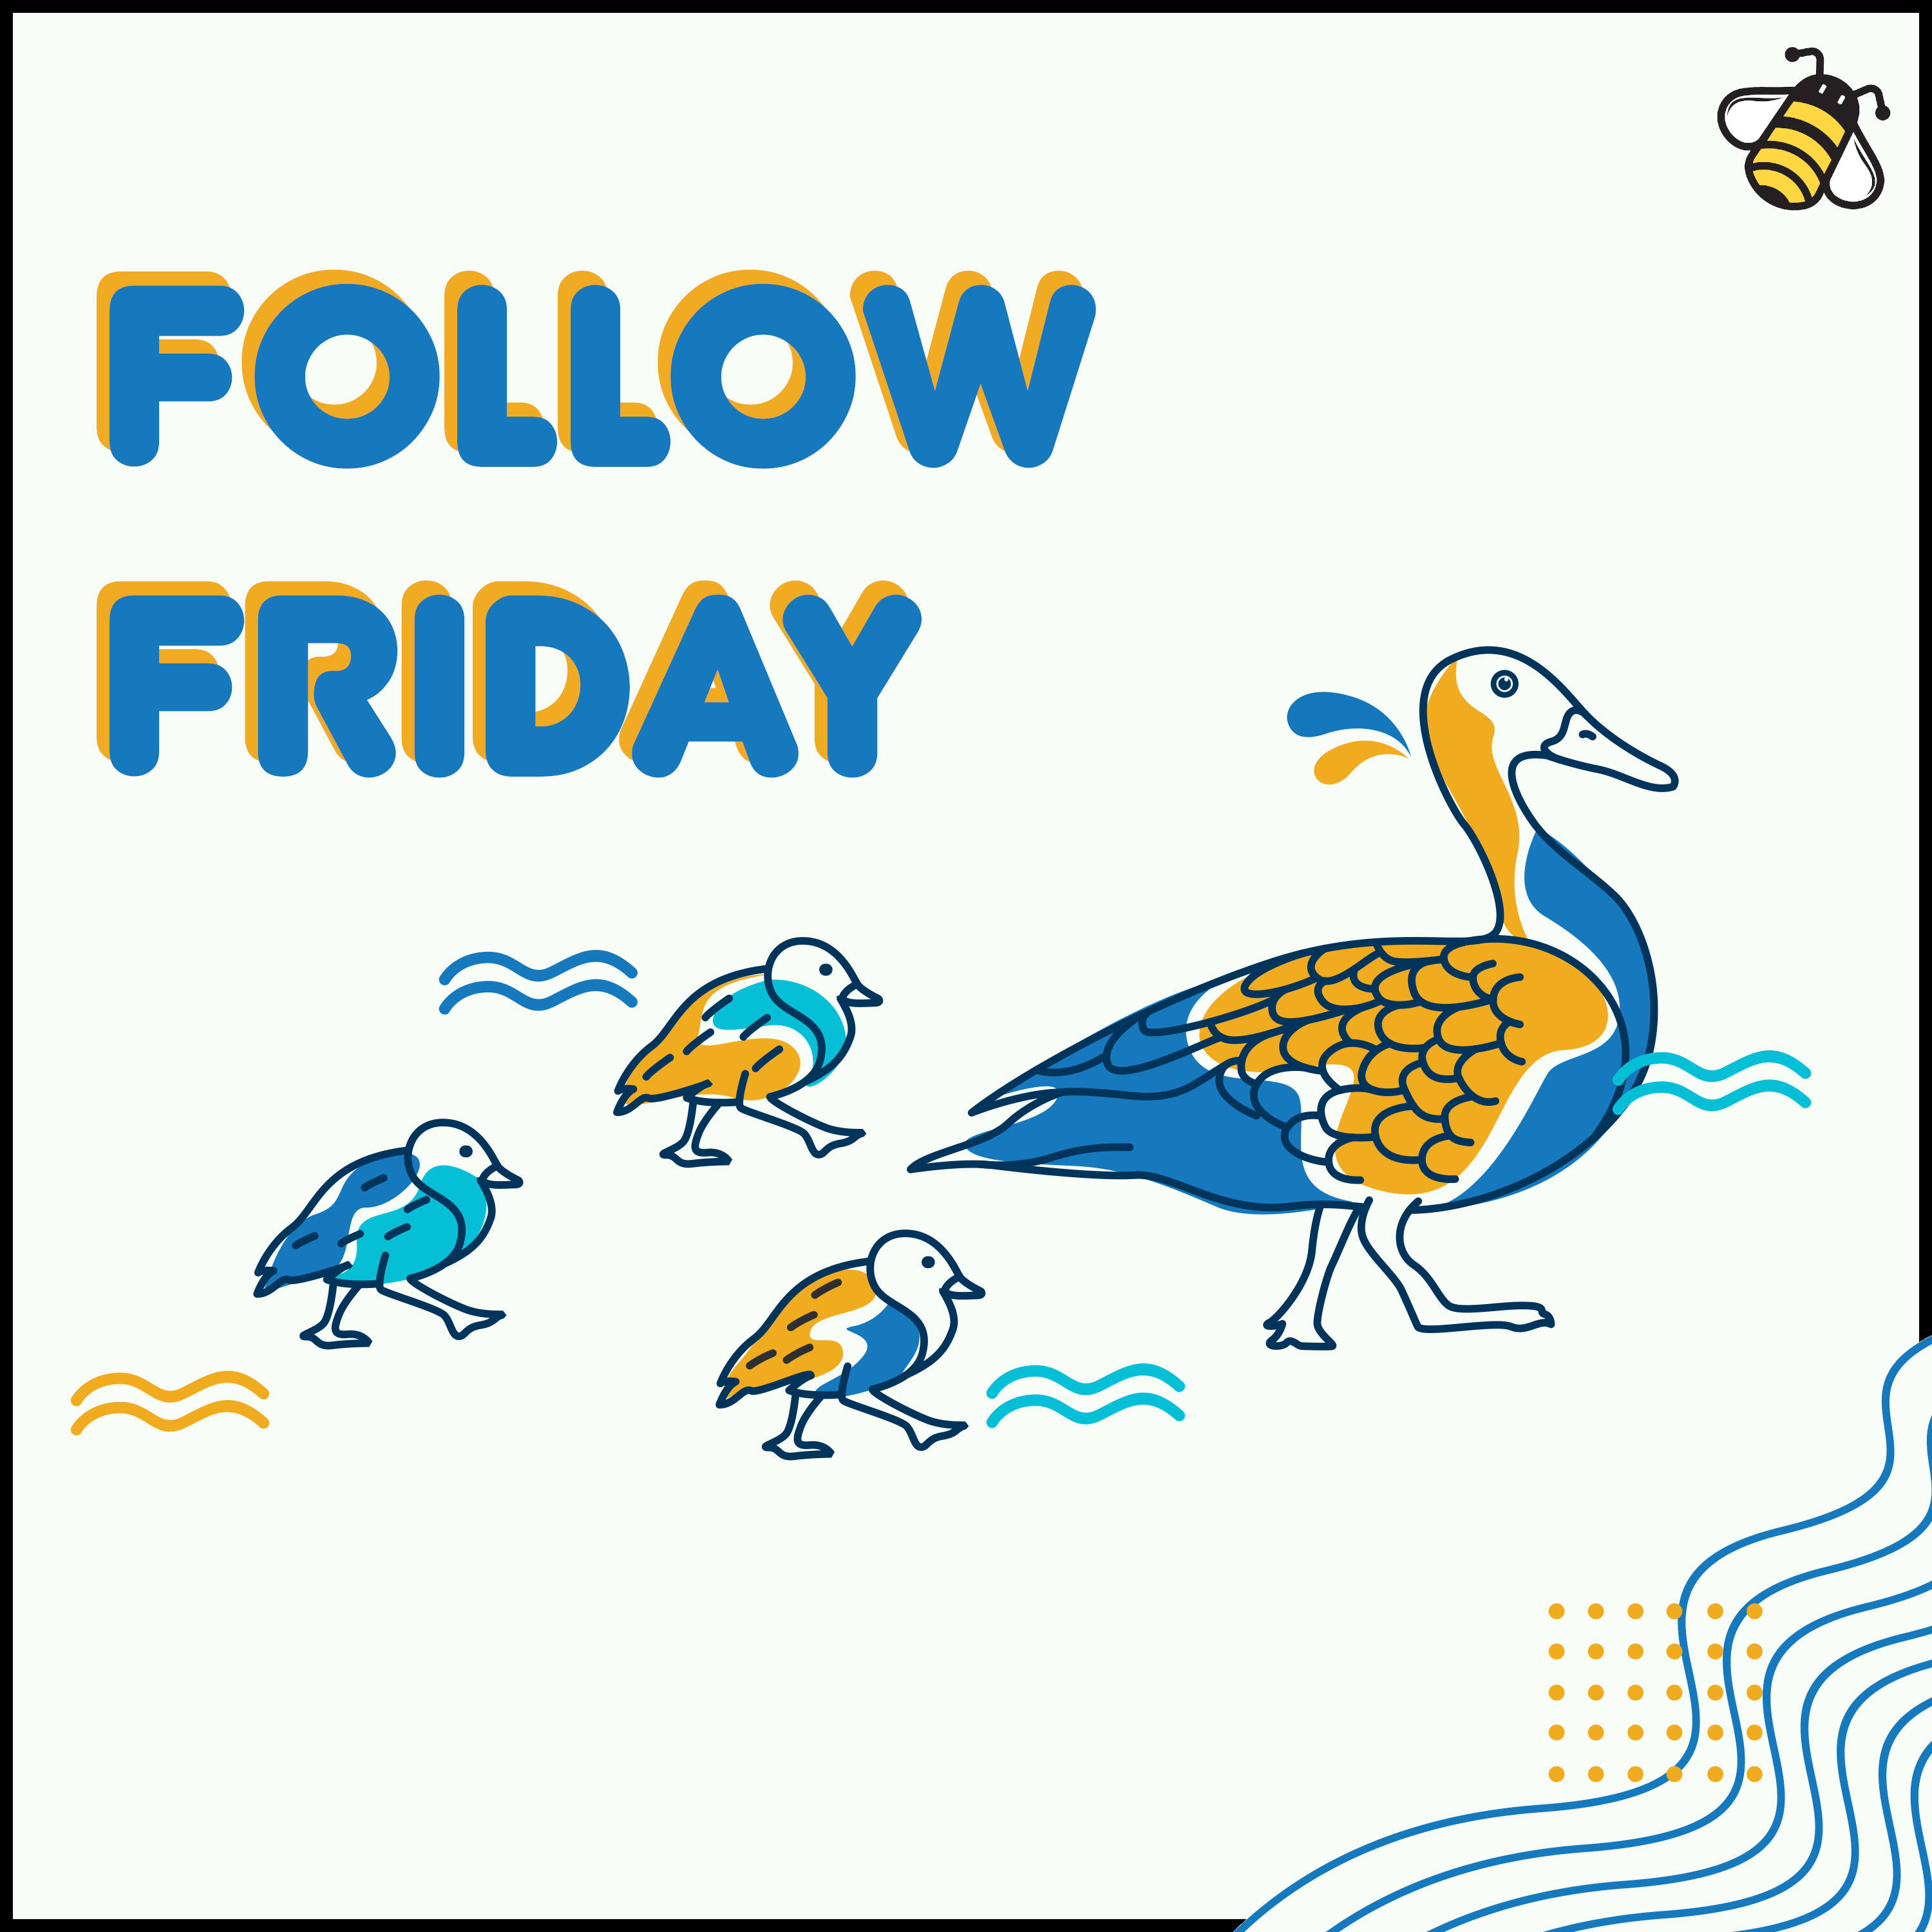 Follow Friday: The Best the Internet Has to Offer